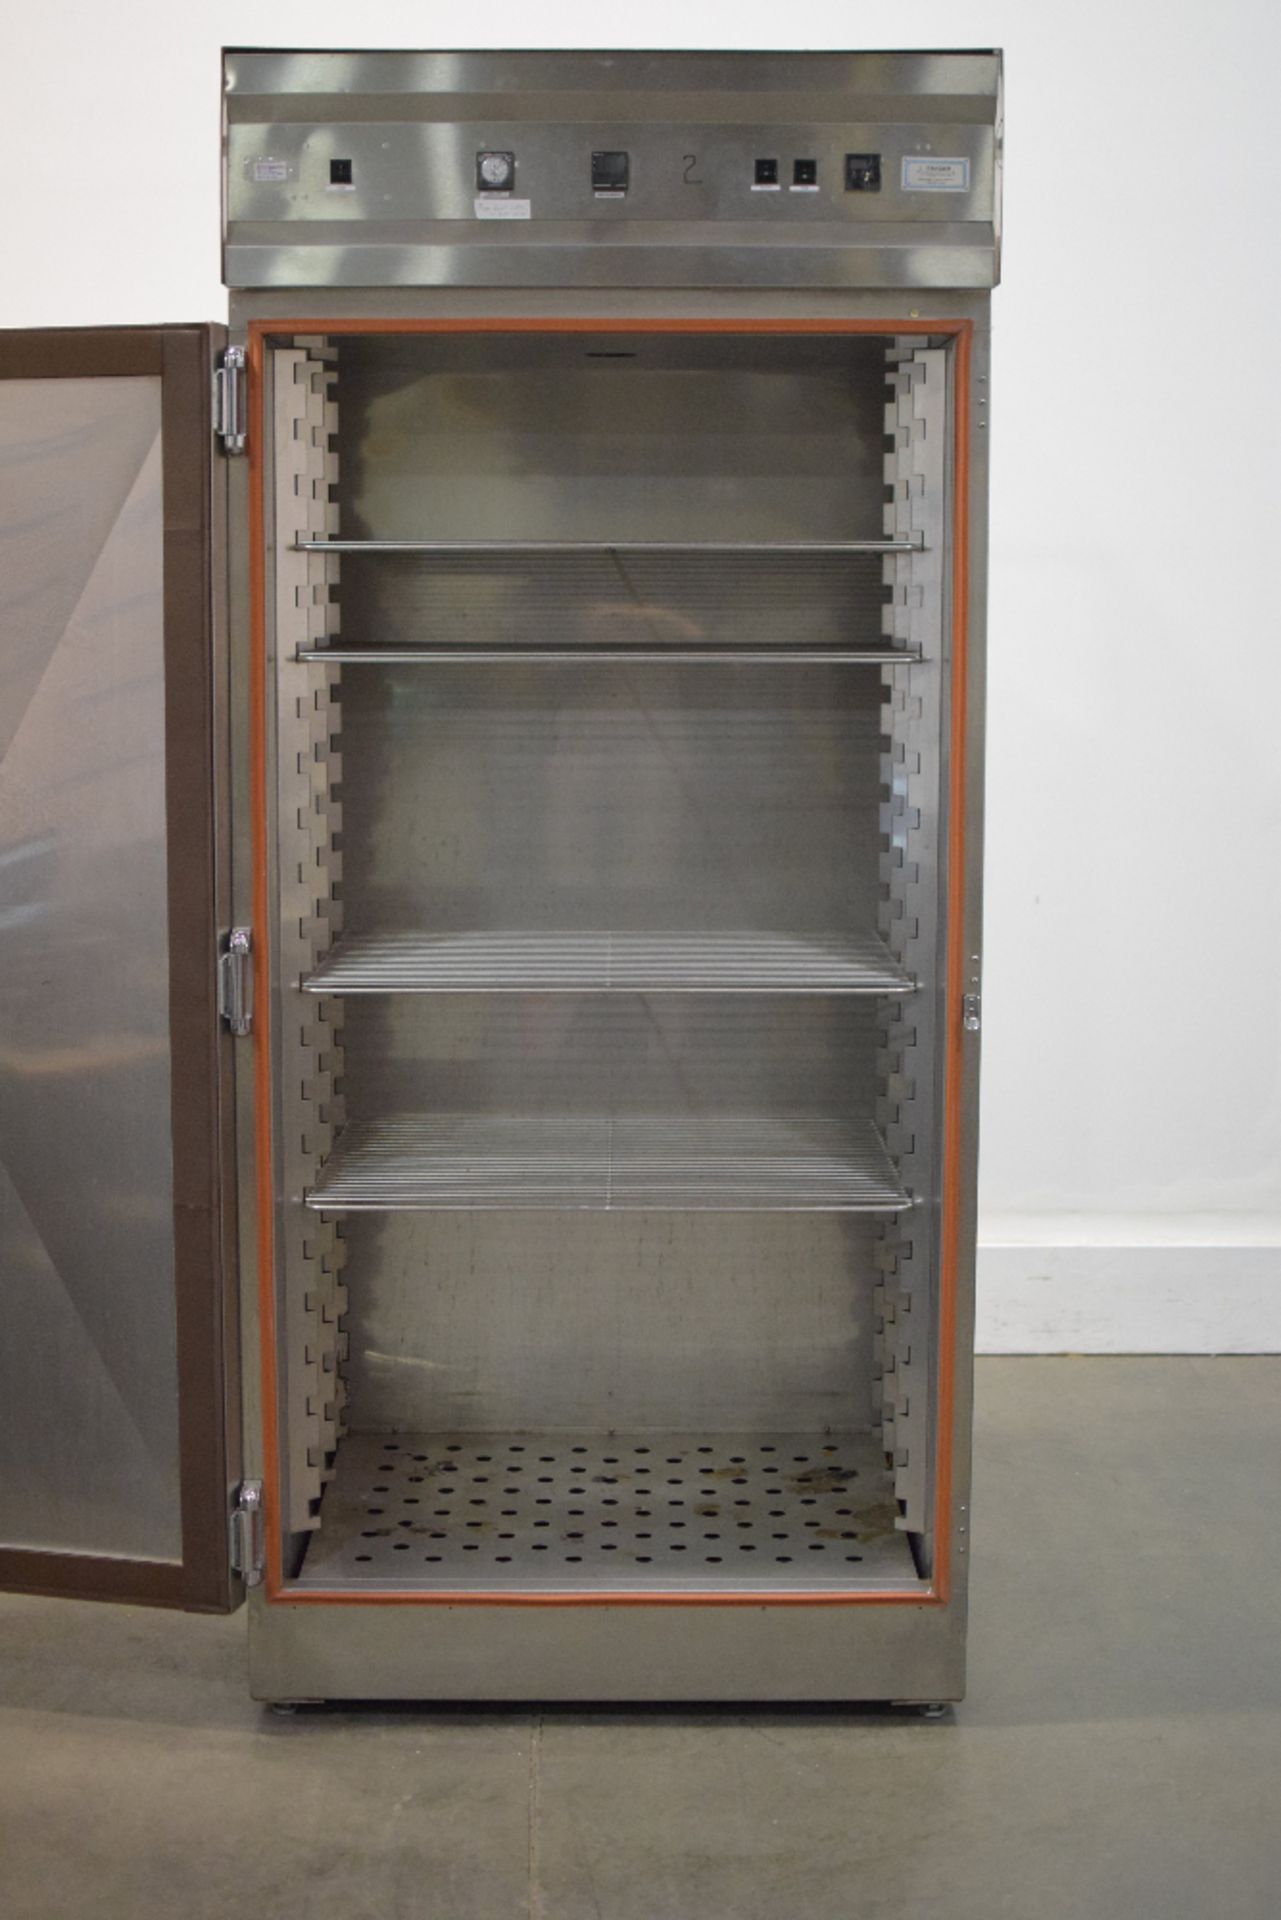 Hotpack H-41D Large Capacity Glassware Dryer - Image 2 of 3